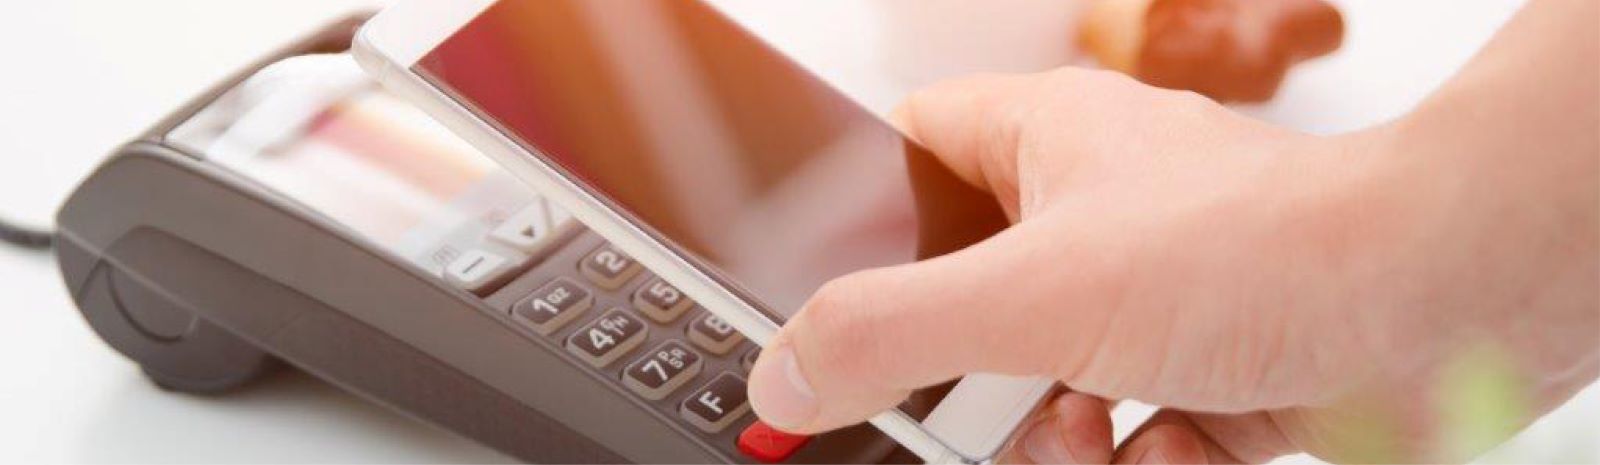 Using phone above card reader for mobile pay